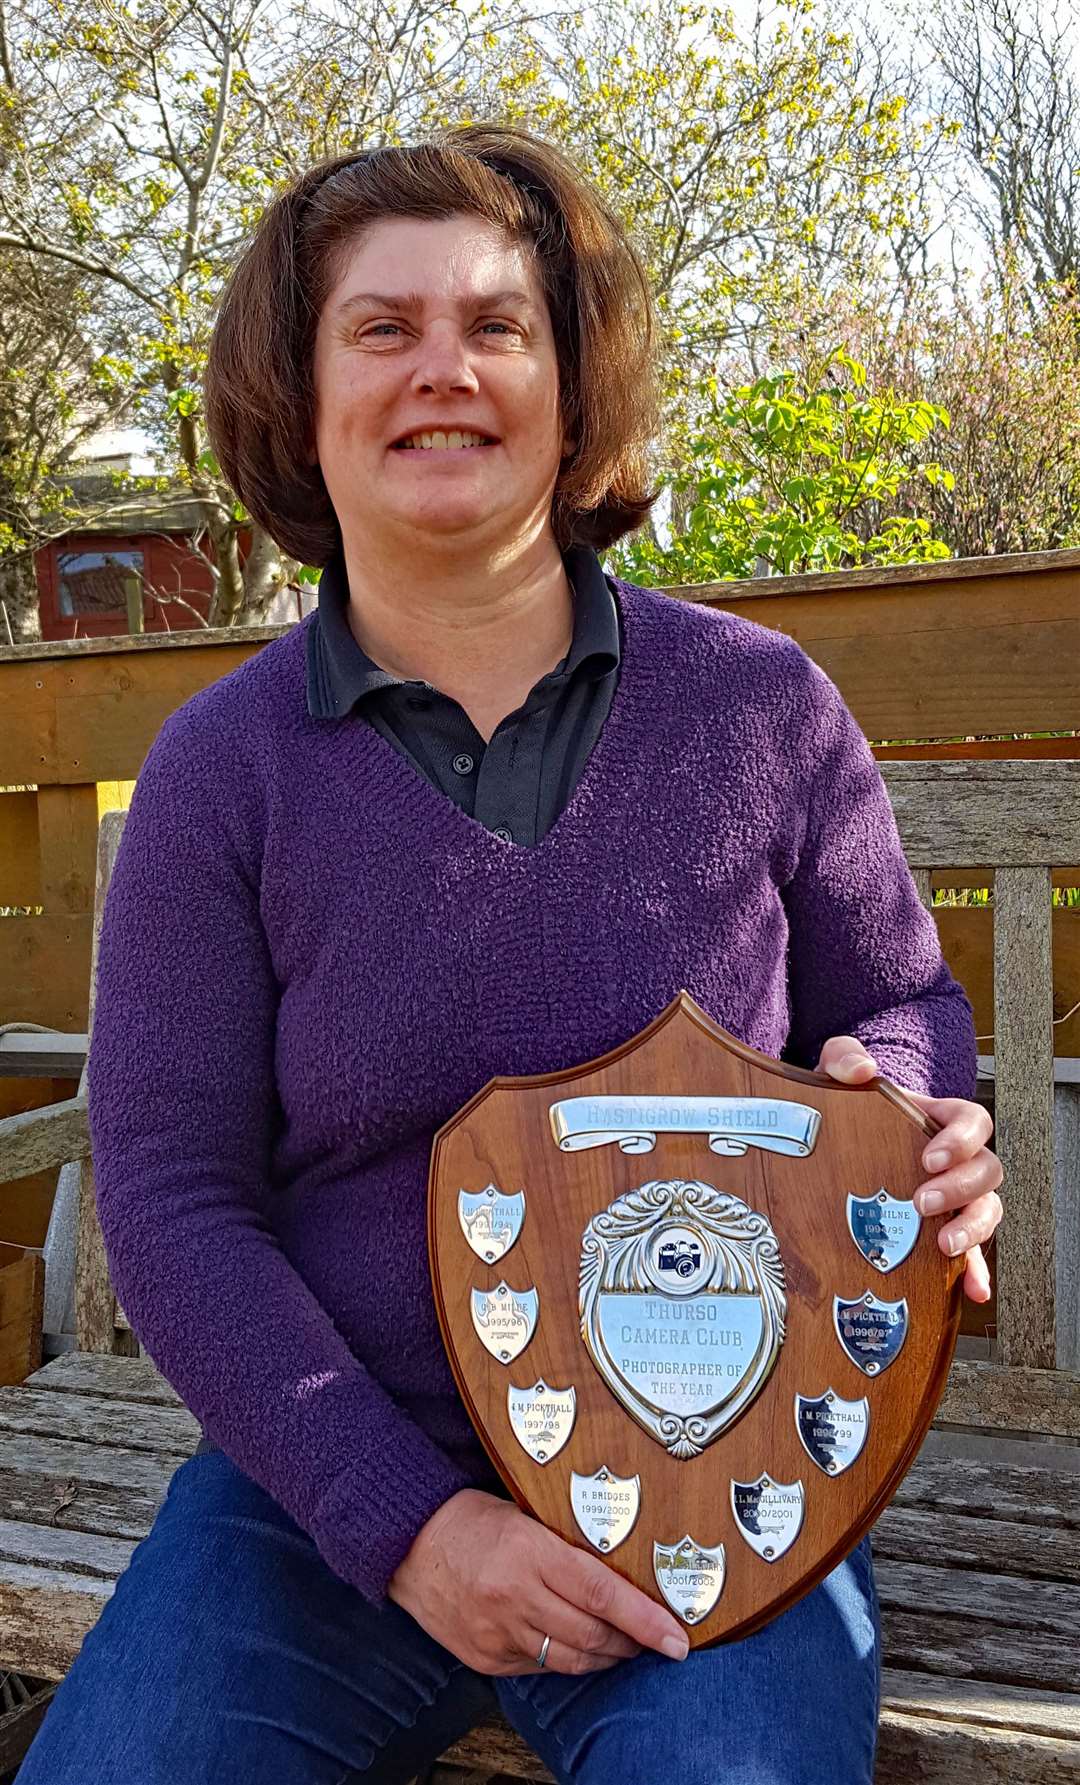 Club photographer of the year Jane Foster with her trophy.